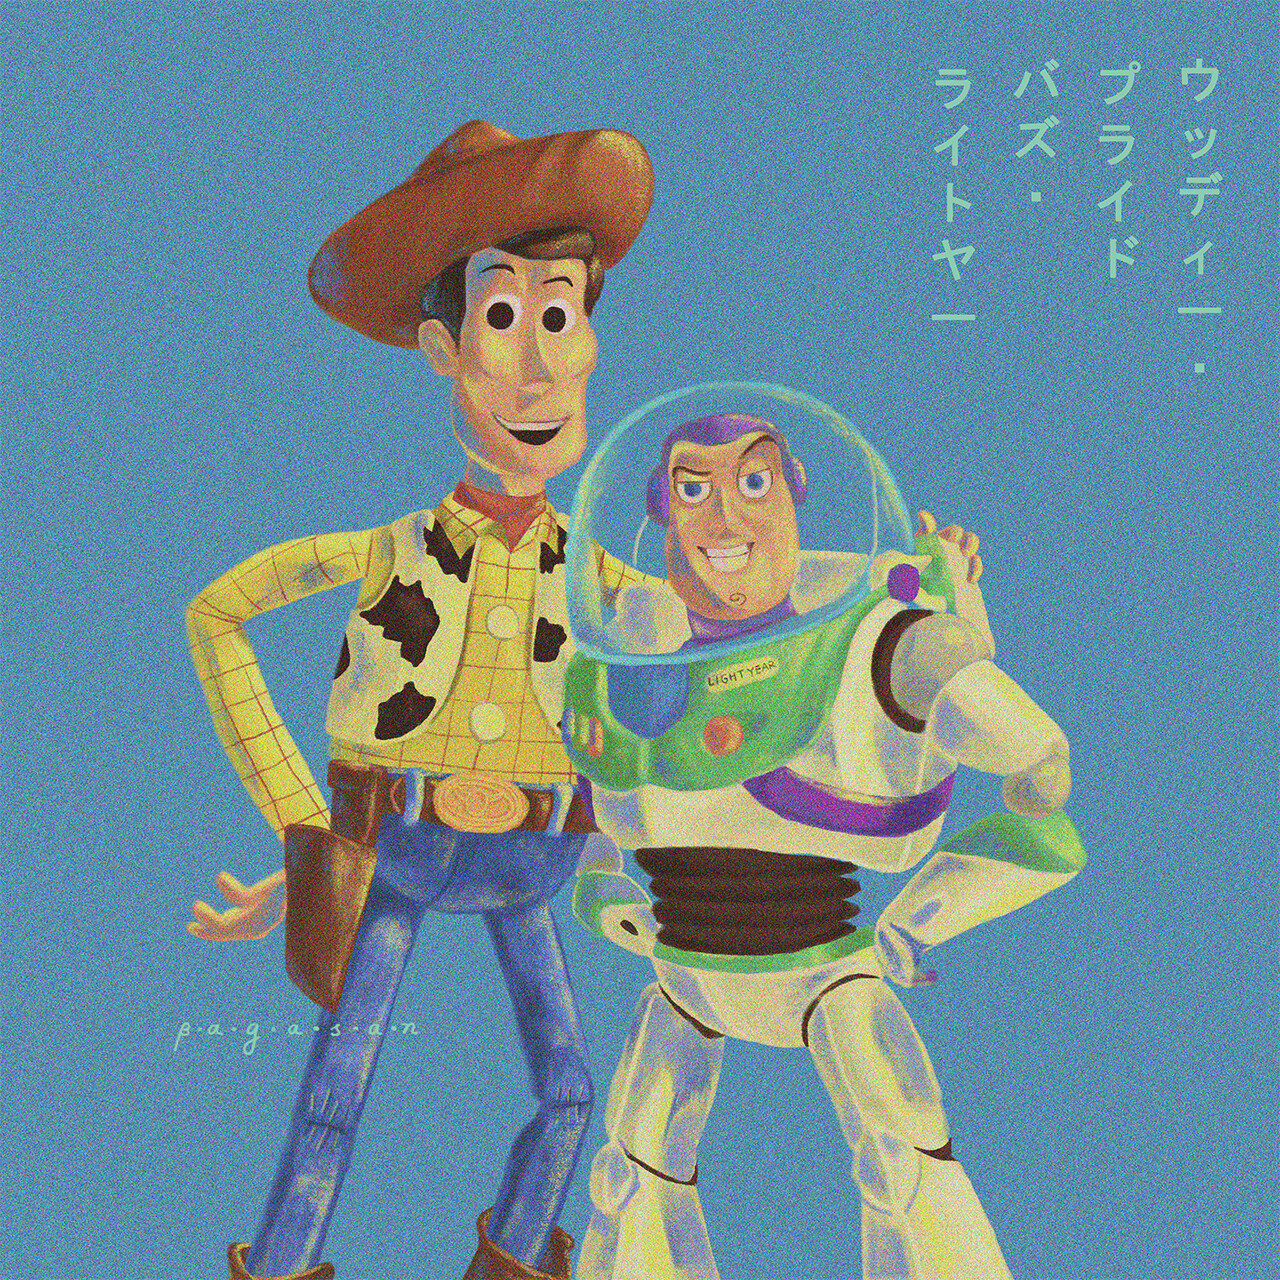 Bagas toy story